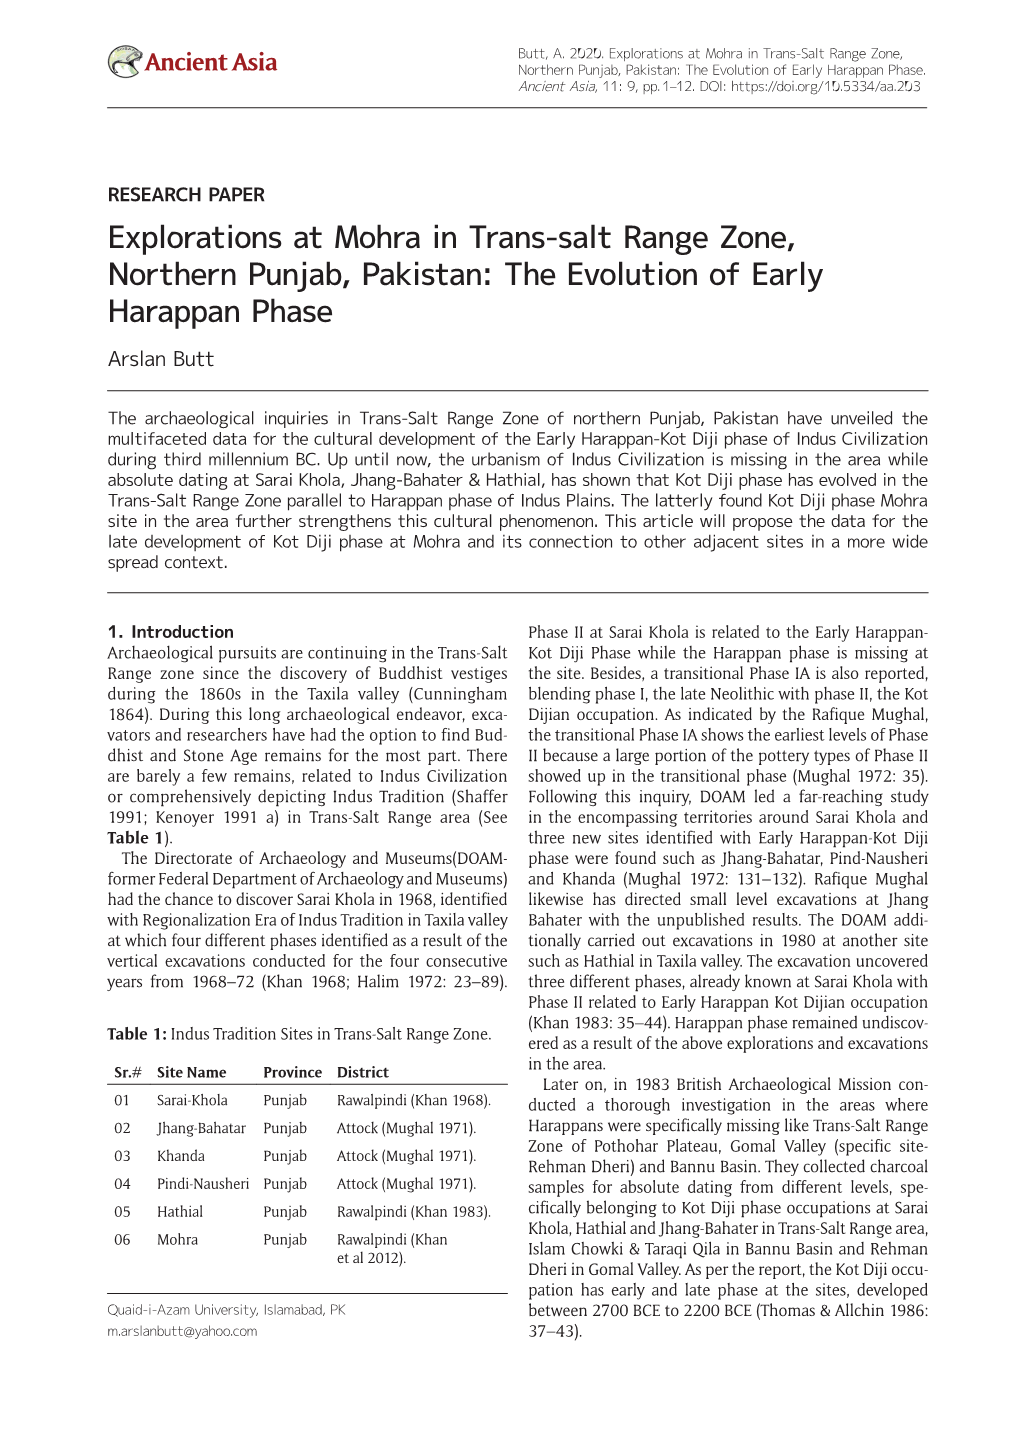 Explorations at Mohra in Trans-Salt Range Zone, Northern Punjab, Pakistan: the Evolution of Early Harappan Phase Arslan Butt